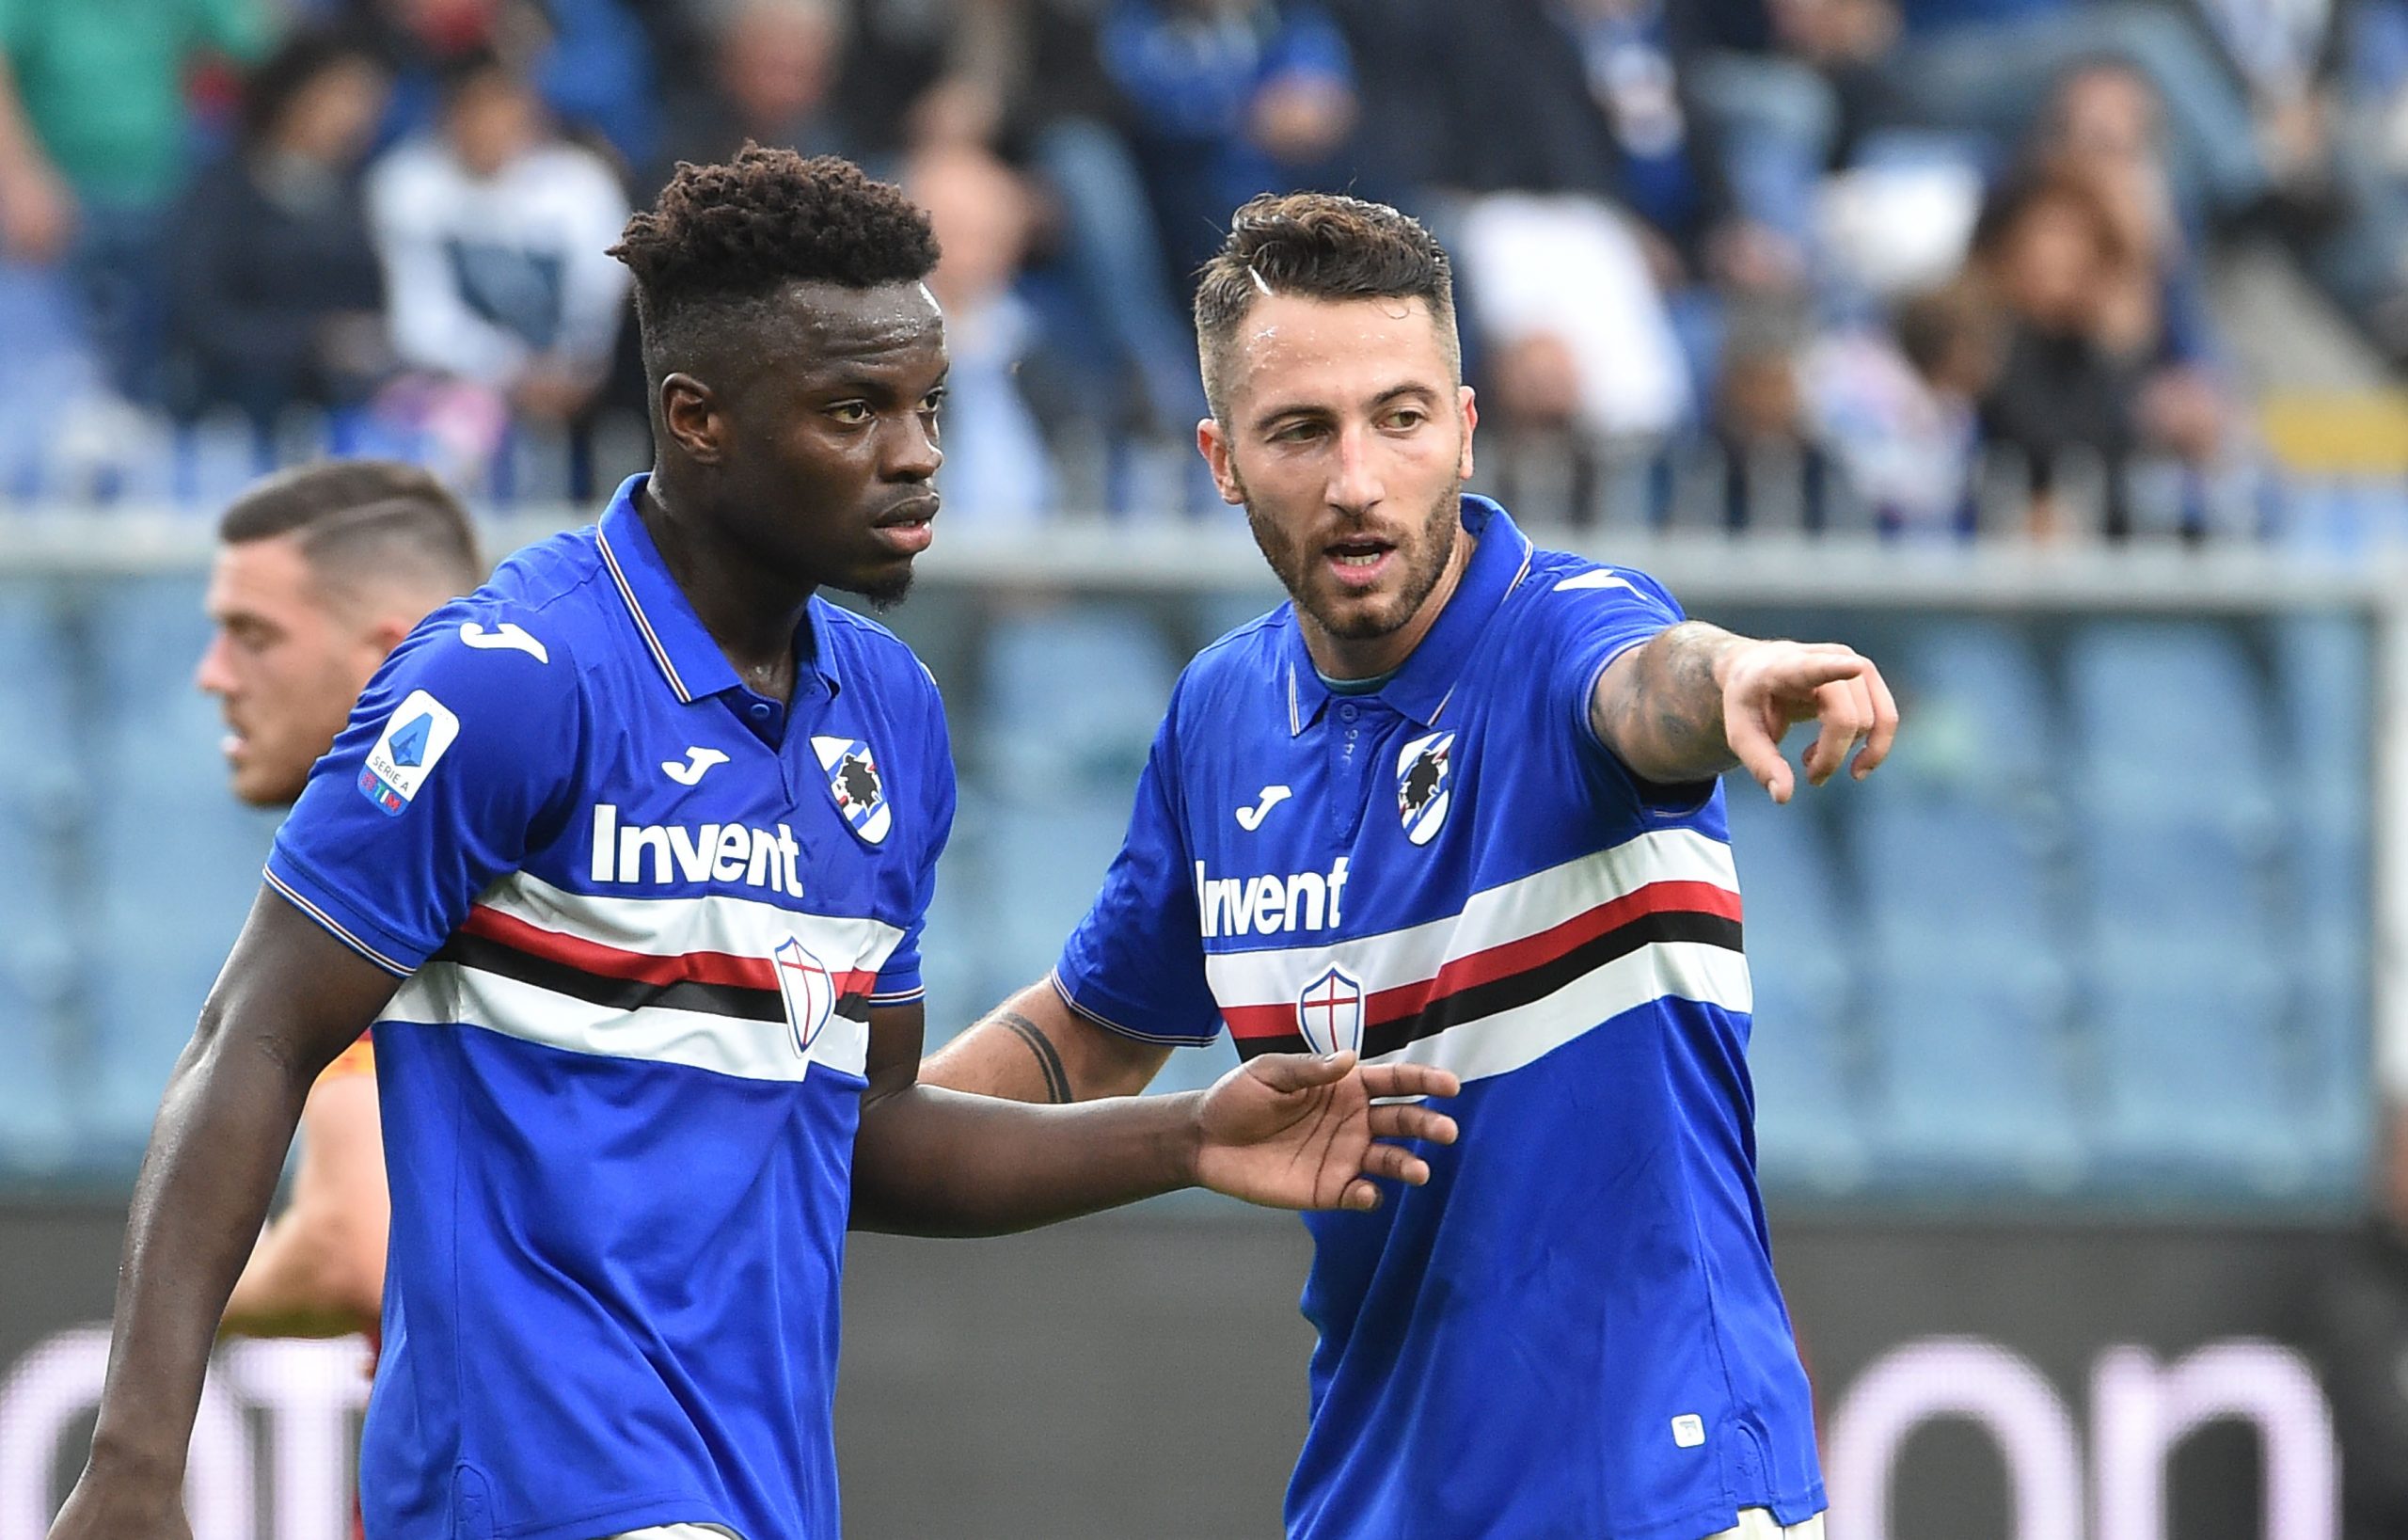 Ronaldo Vieira (L) has impressed with Sampdoria in the last two seasons (Getty Images)